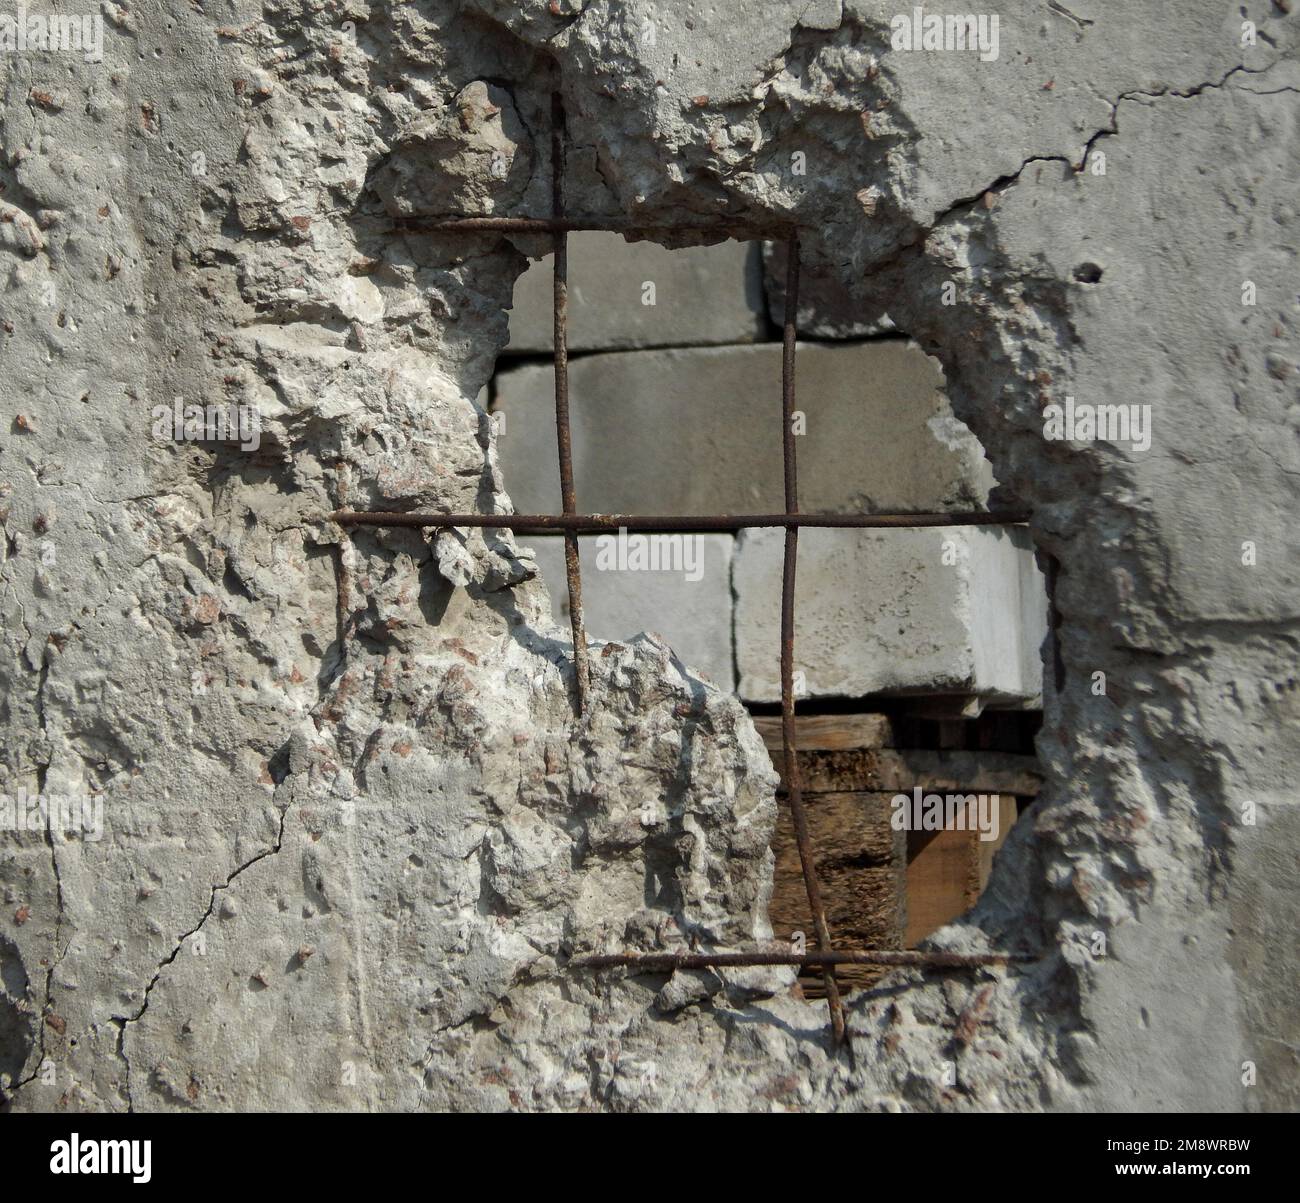 Hole In Damaged Concrete Wall By A Rocket Hit Stock Photo